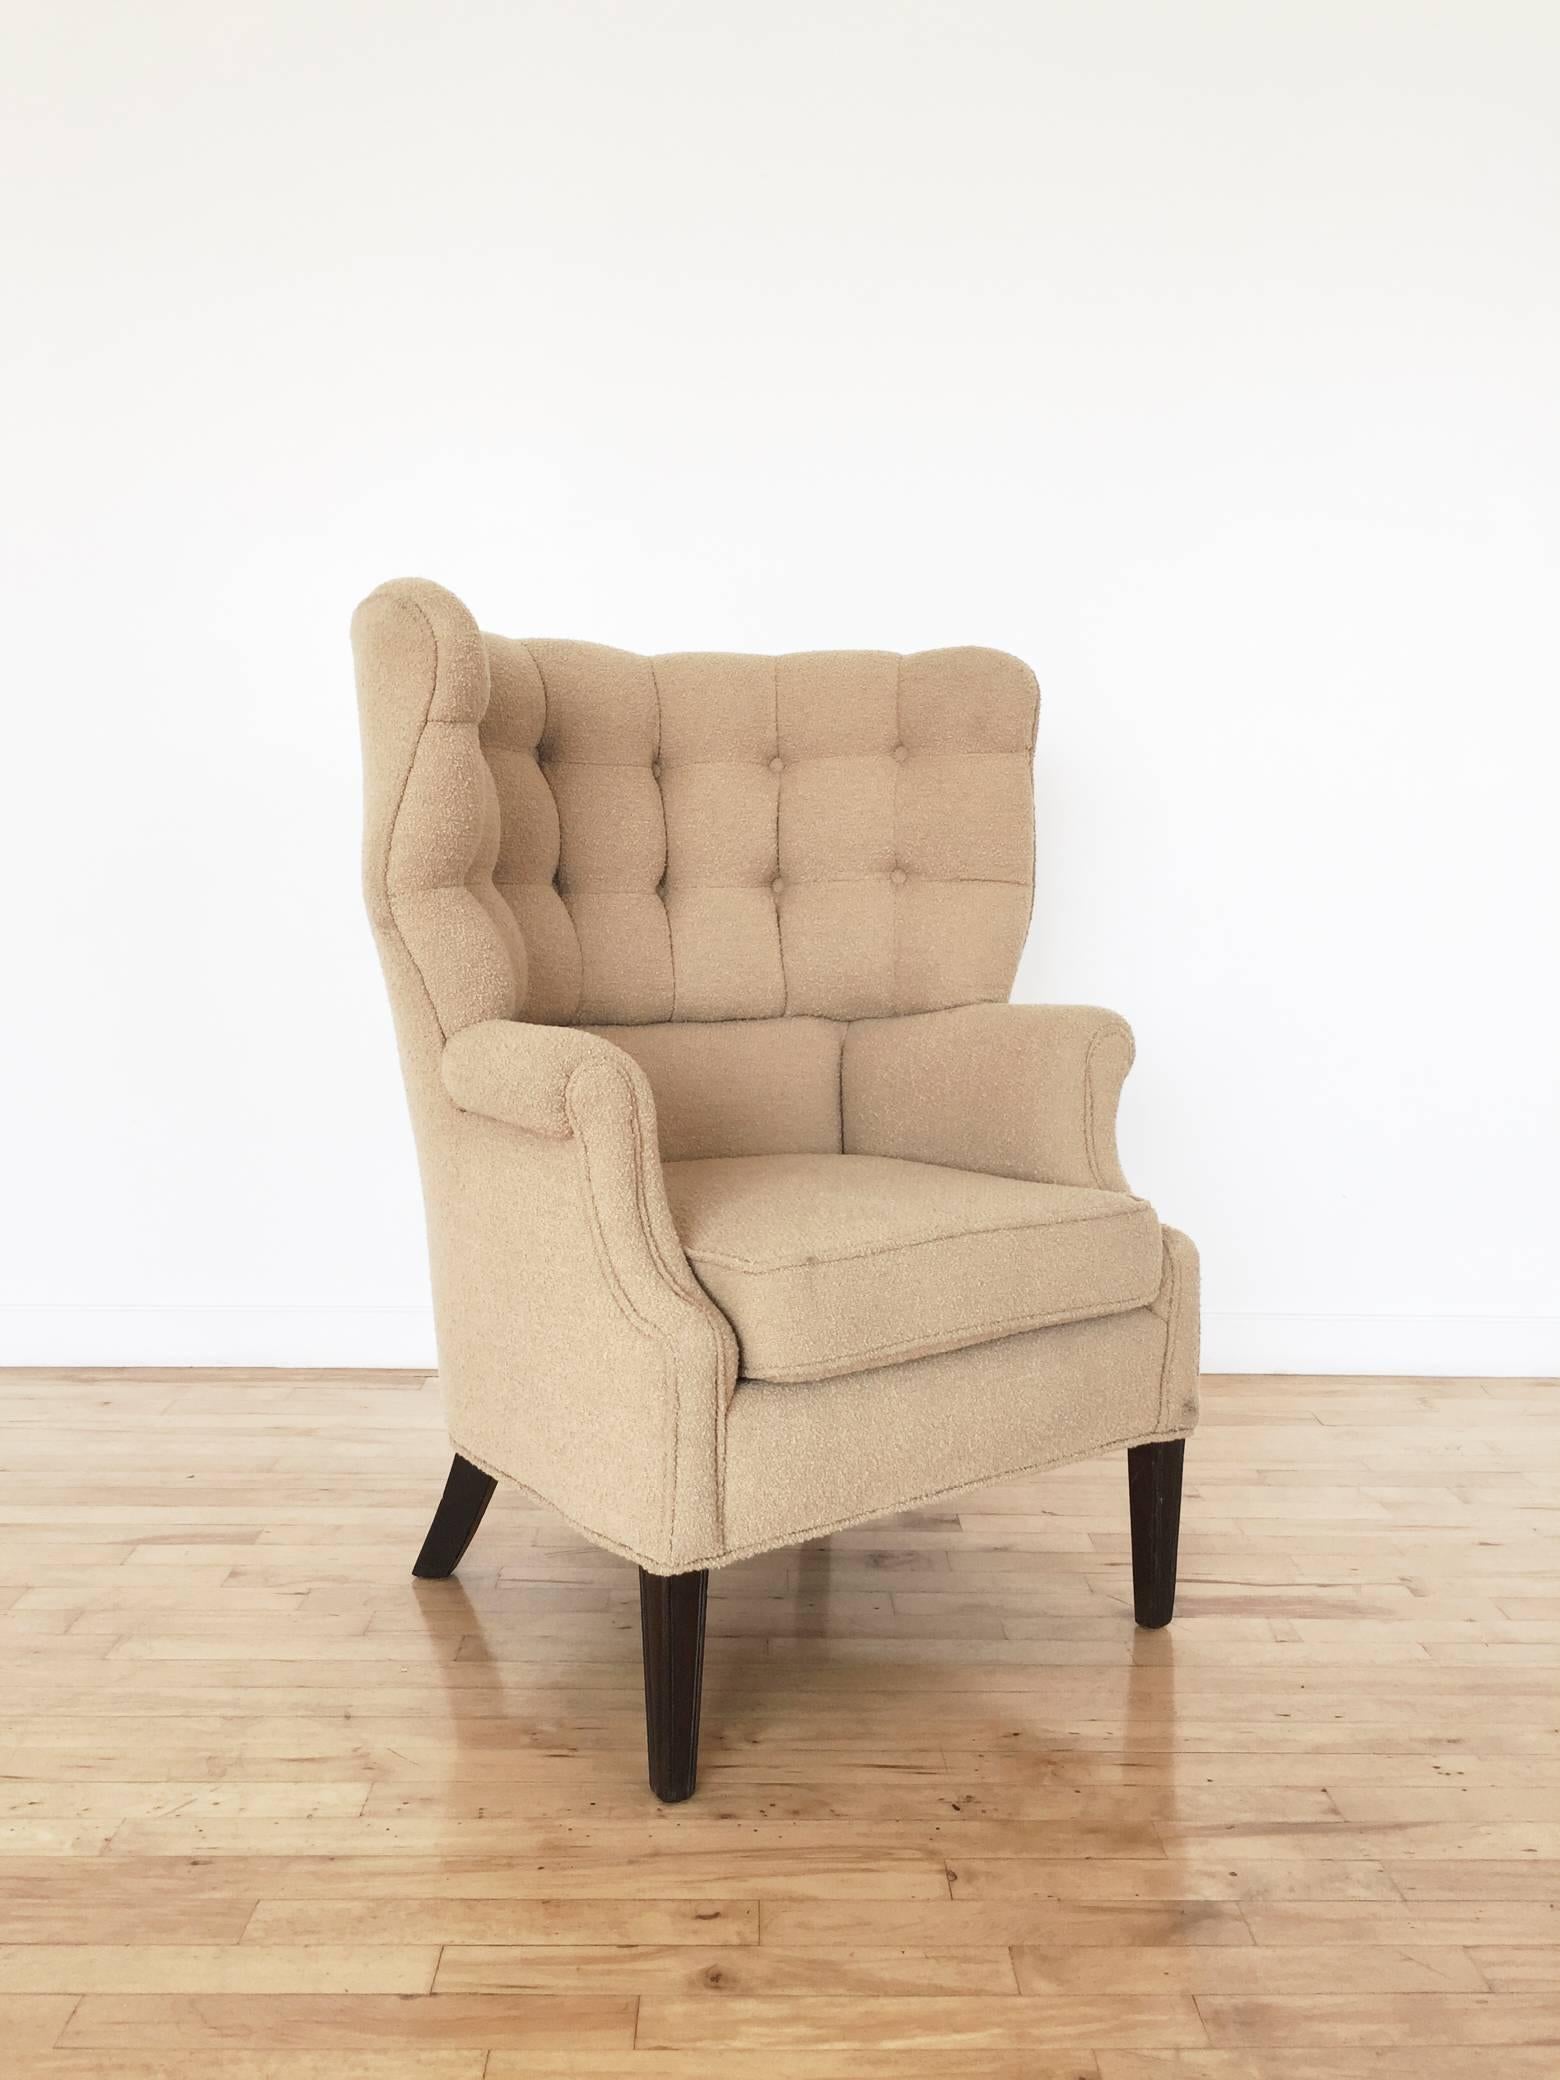 Modernist wing chair with tufted, curved high back and scrolled arms. Upholstered frame sits on dark wood legs. Upholstered in tan wool bouclé that remains in very good condition. A Mid-Century take on the traditional English club chair.